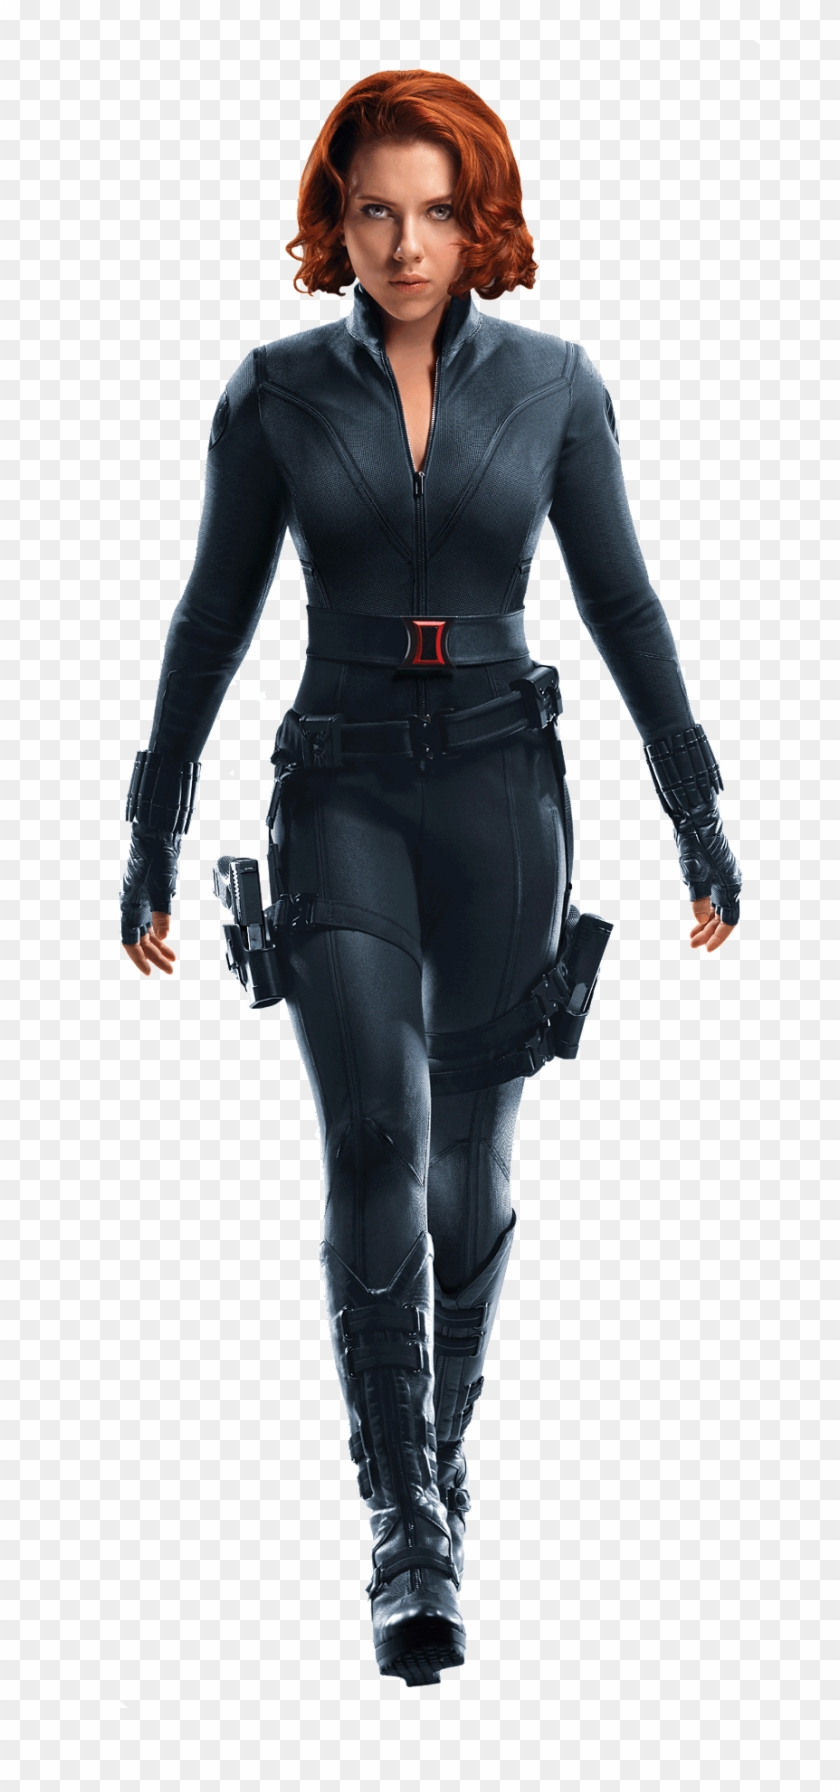 Black Widow Quality Png - Black Widow Avengers Png Clipart #297480